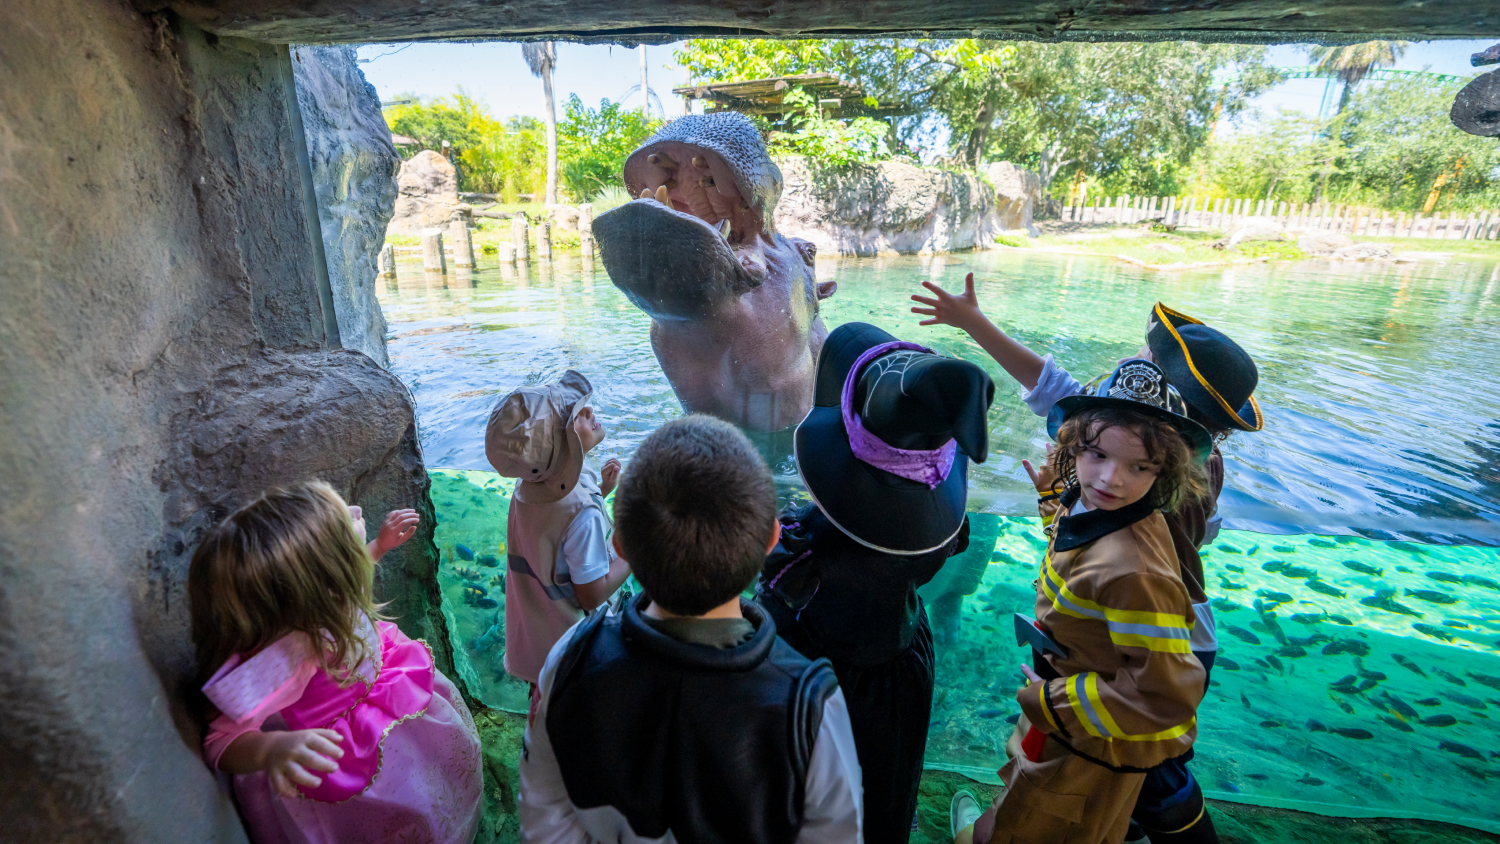 Kids in costume checking out a hippo at Busch Gardens Tampa Bay Spooktacular.